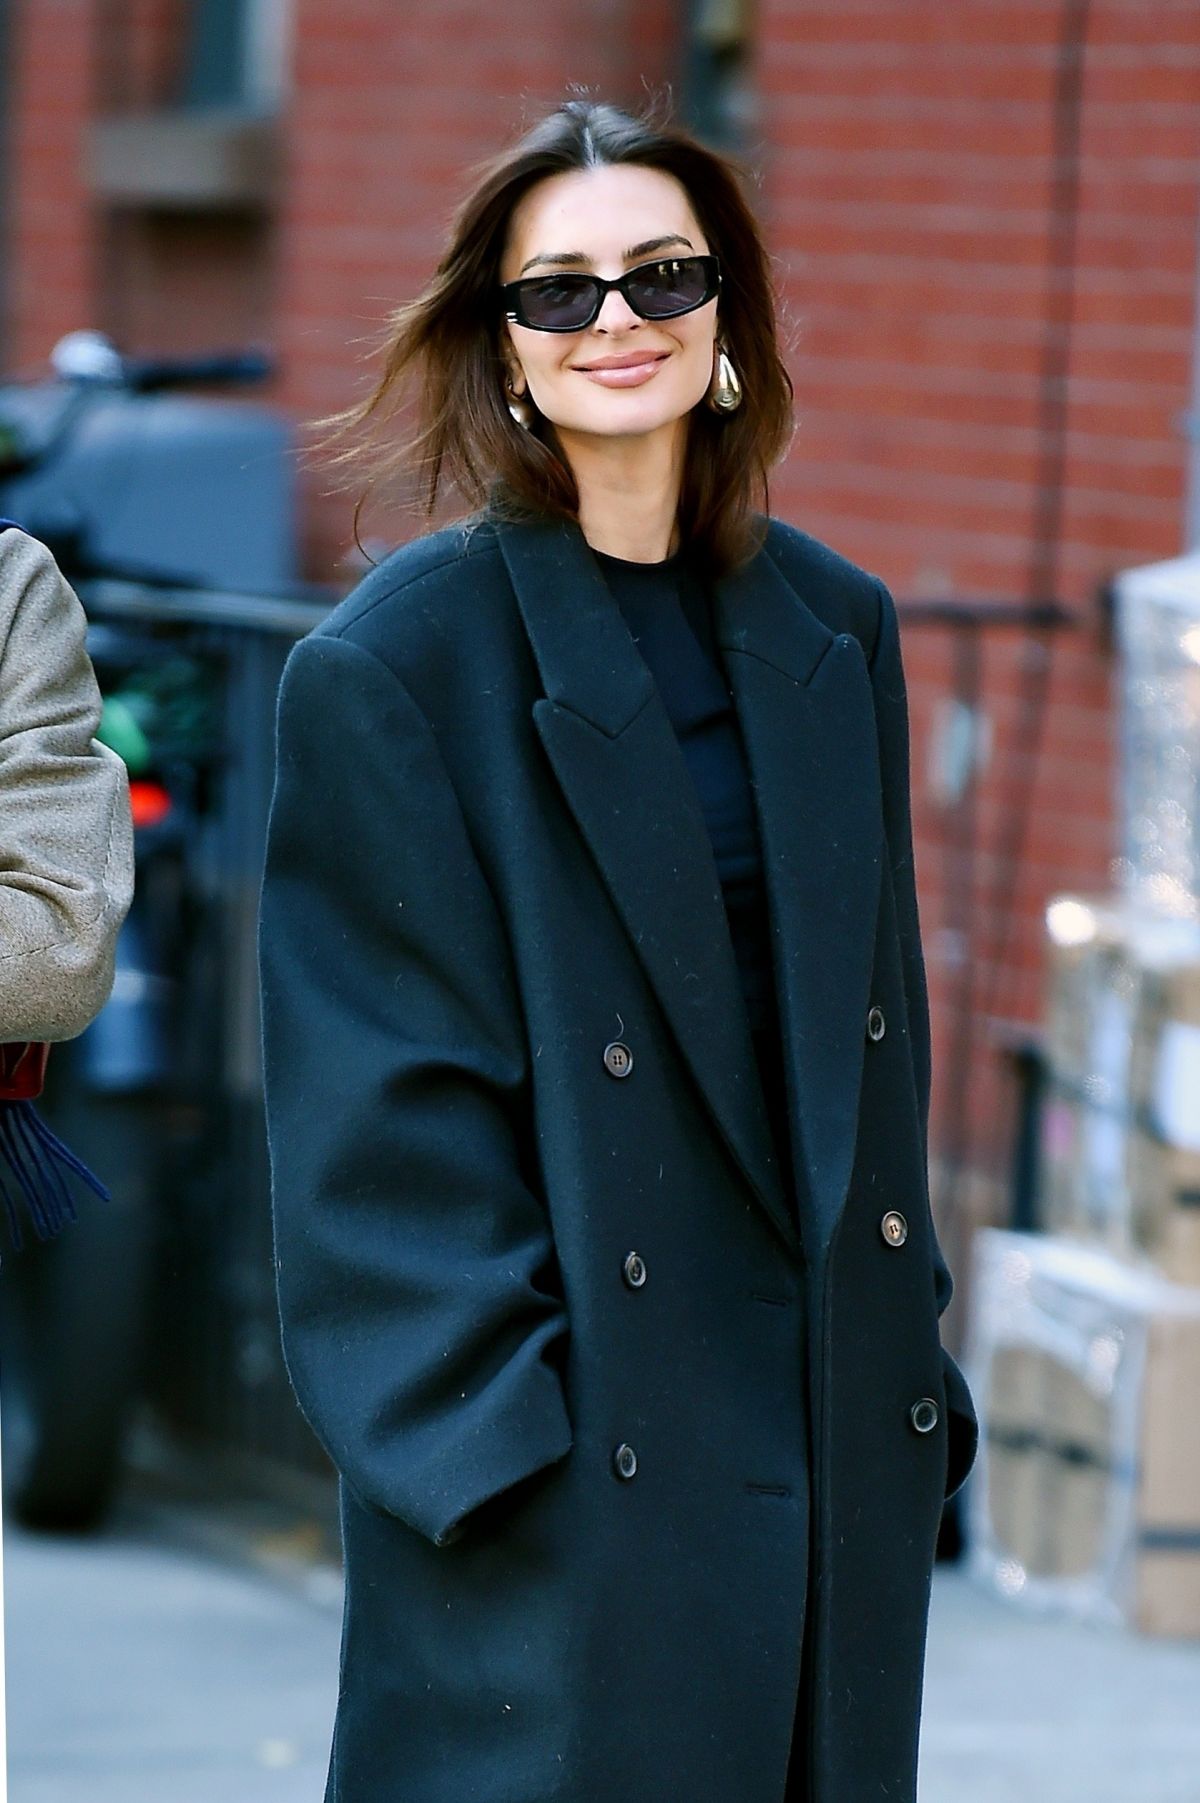 Emily Ratajkowski in Green Overcoat and Blue Denim Outfit in NYC 2